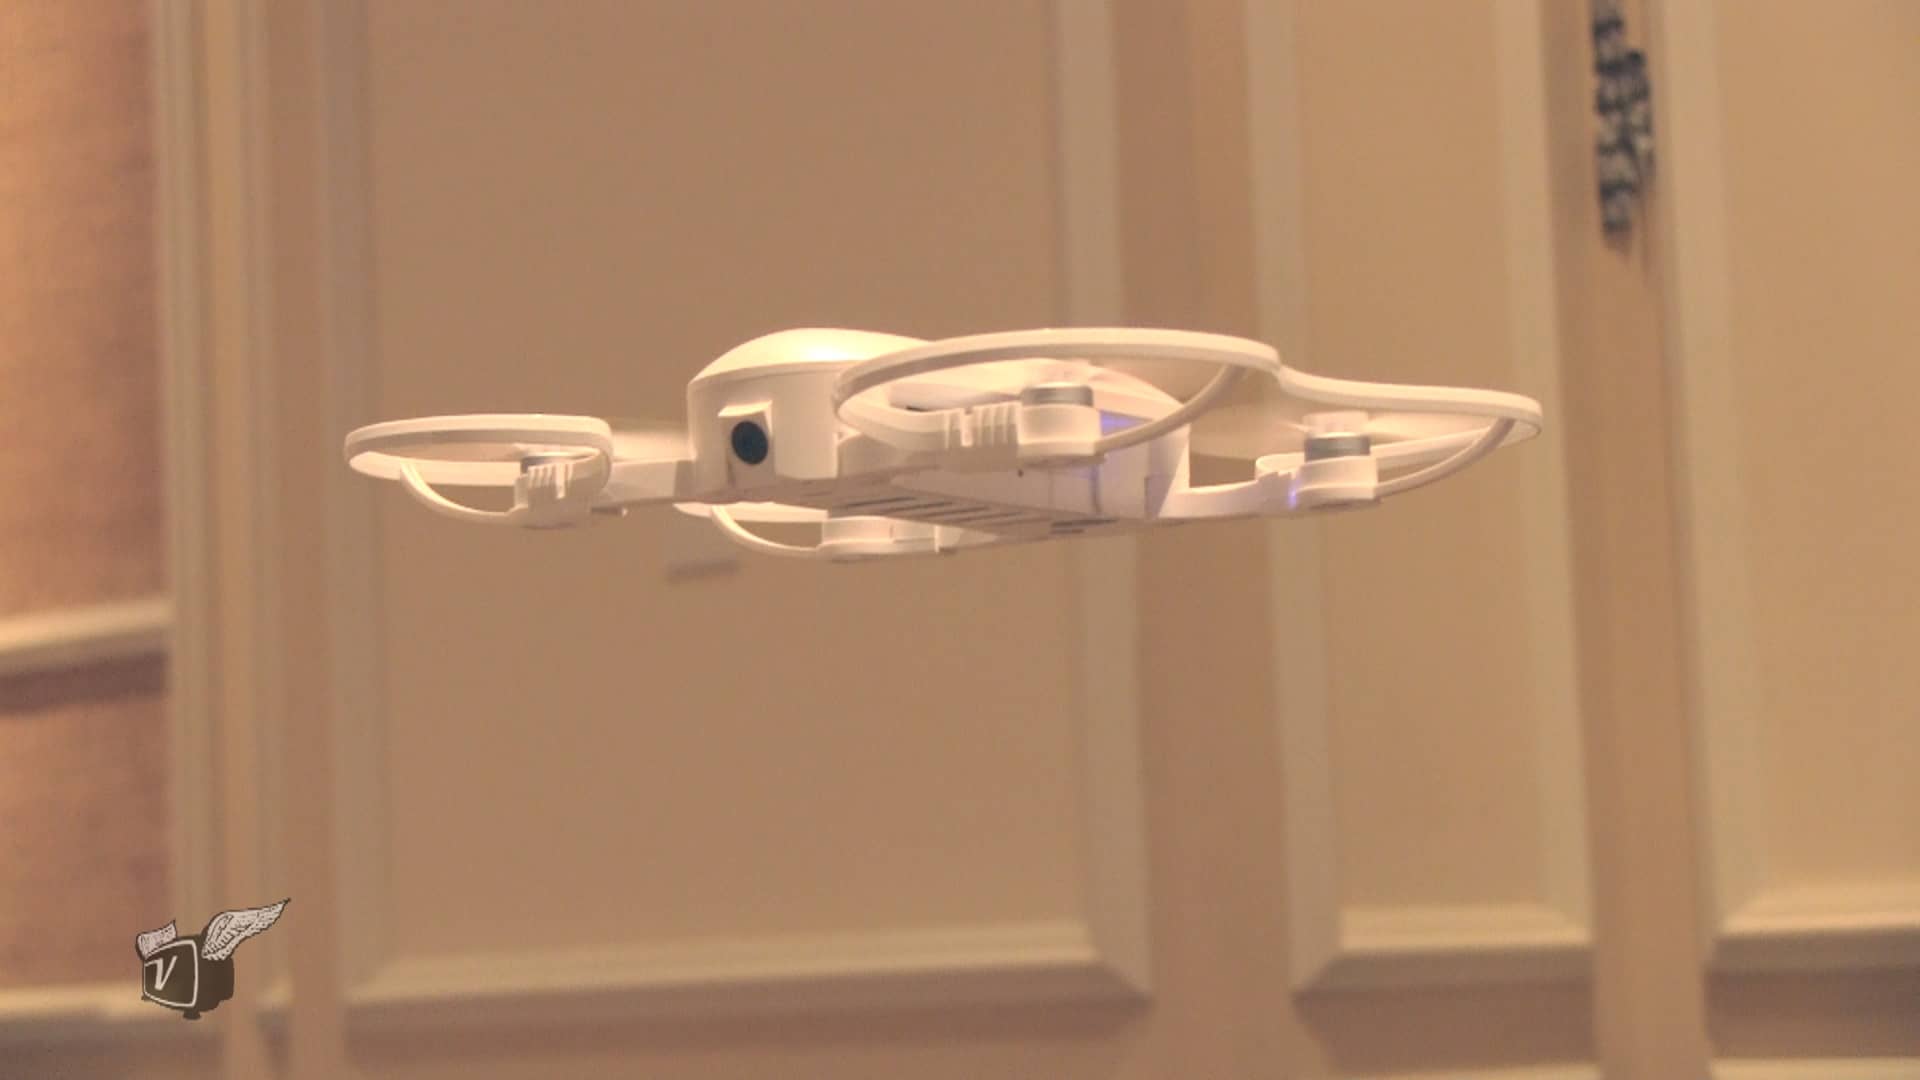 The Dobby pocket drone in action at Pepcom's event associated with CES2017.